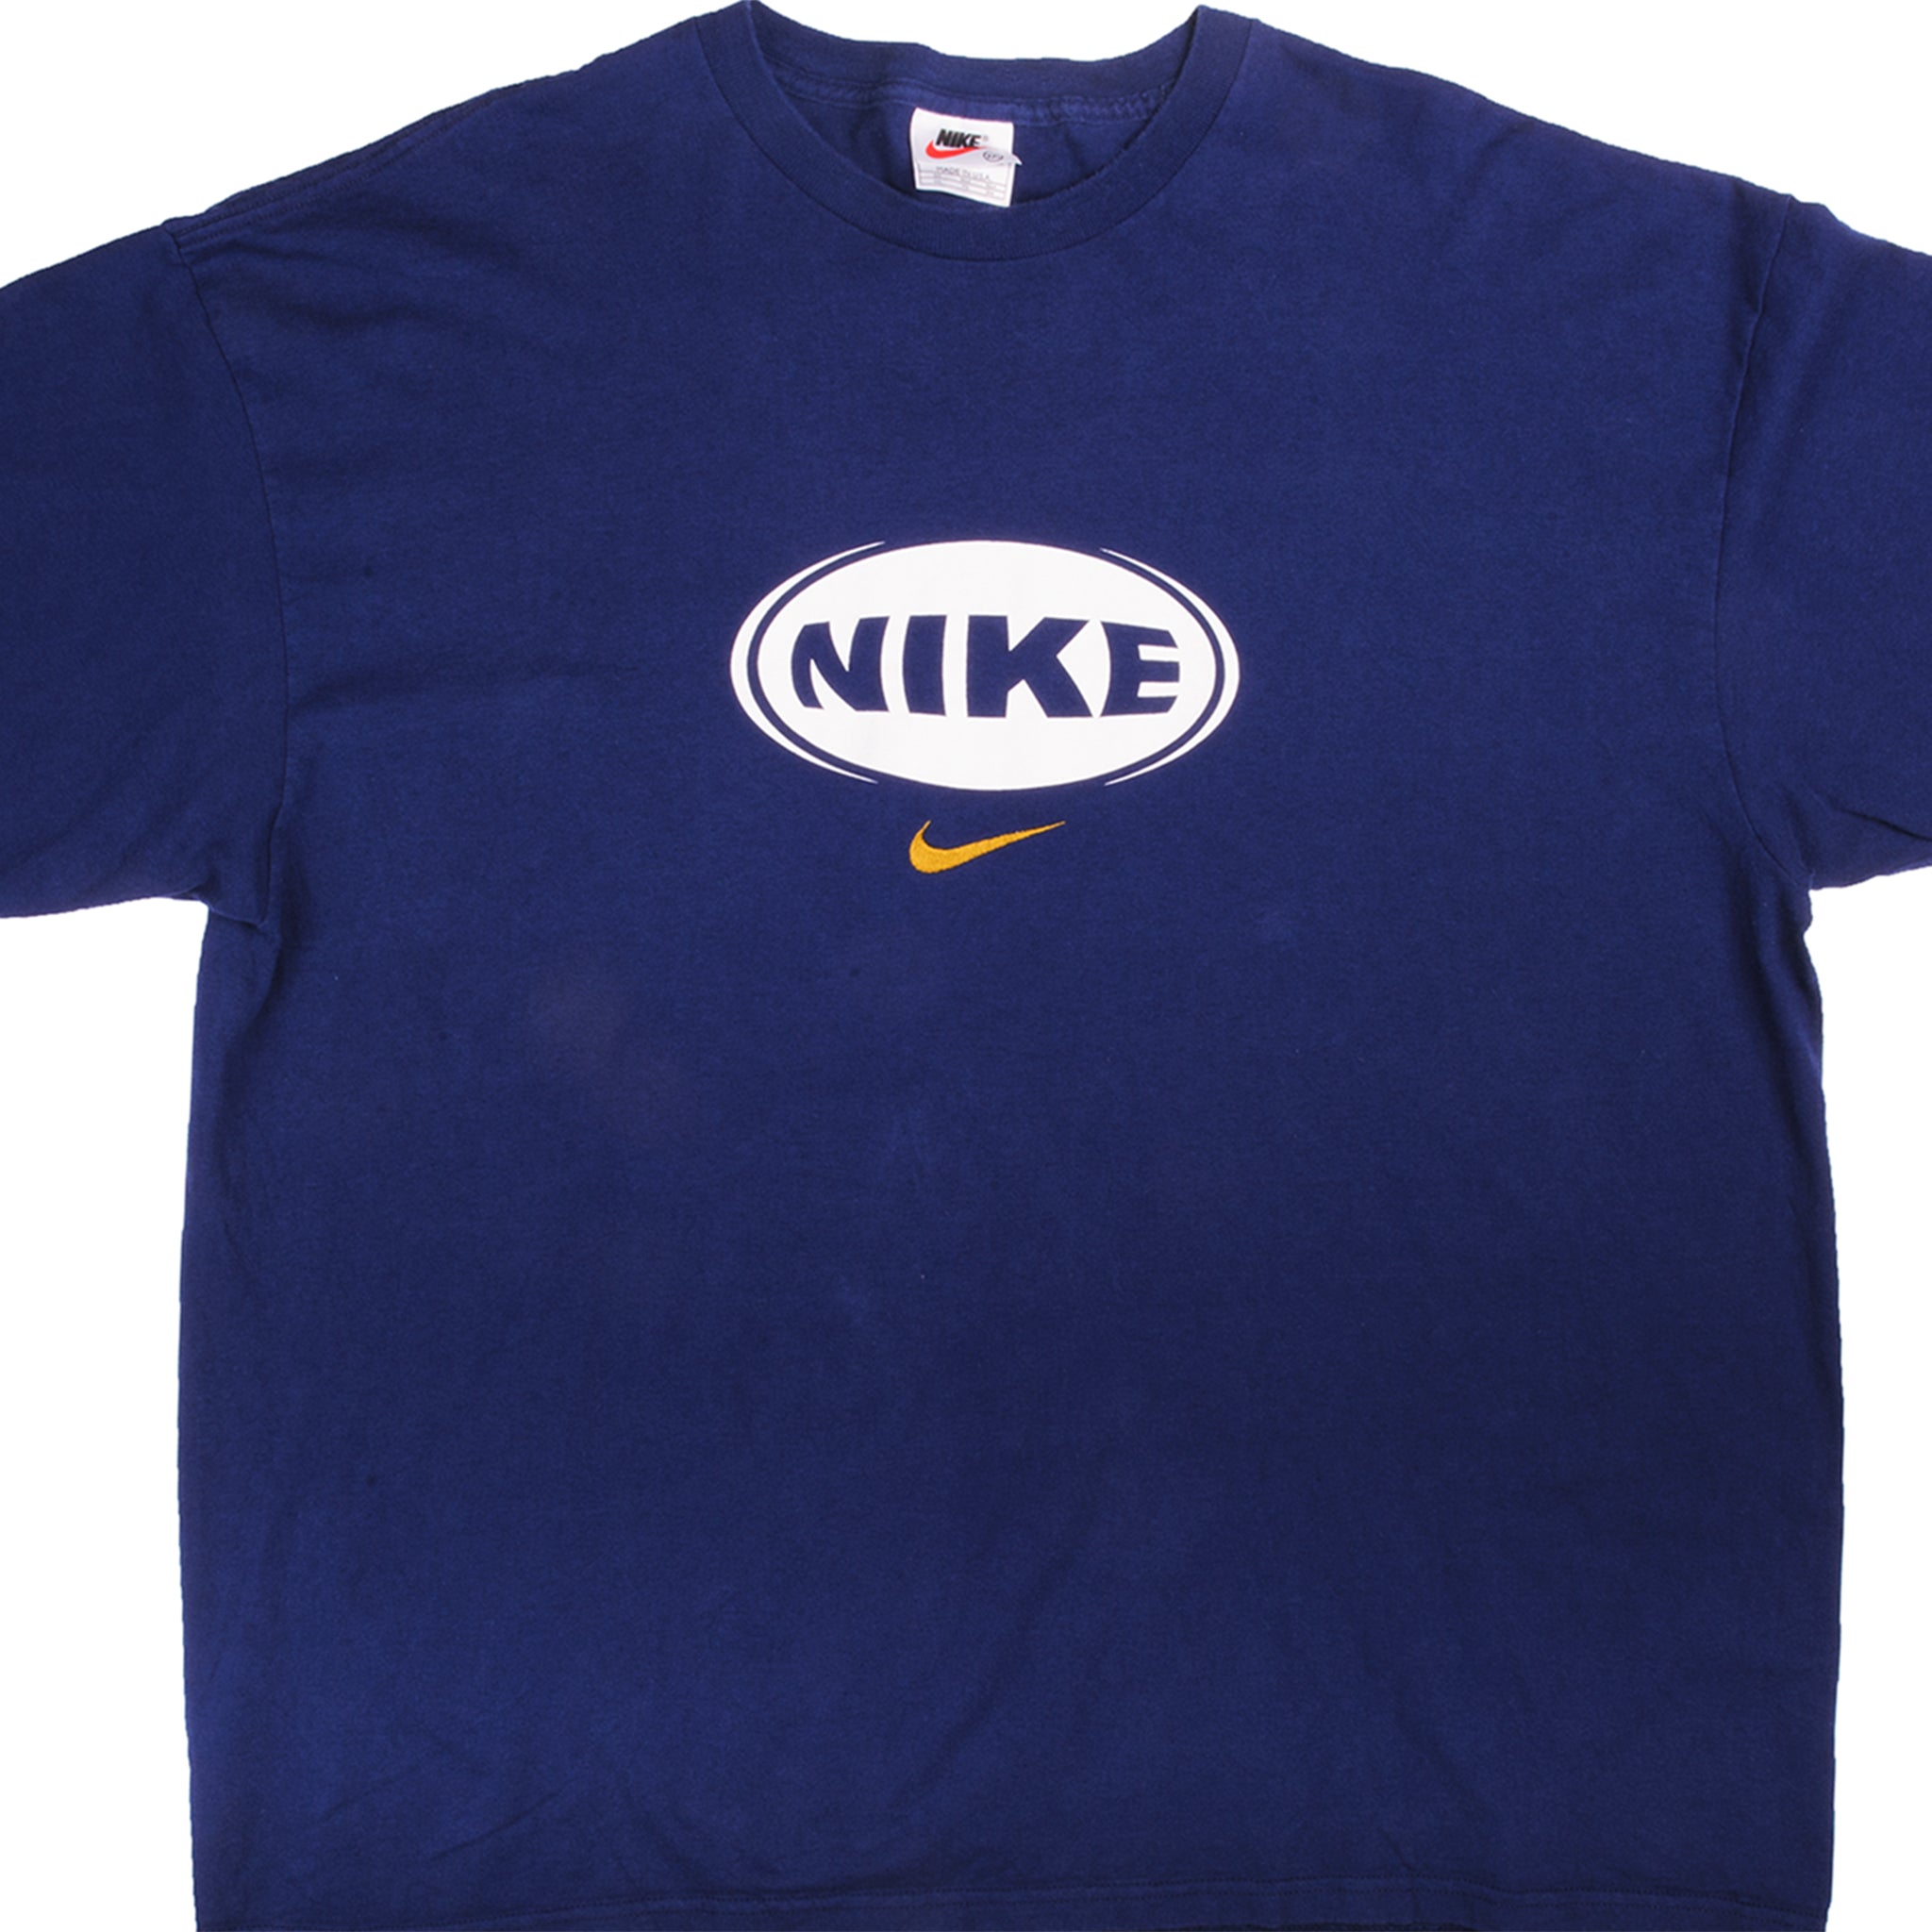 VINTAGE NIKE MIDDLE SWOOSH TEE SHIRT LATE 90S MADE IN USA – rare usa